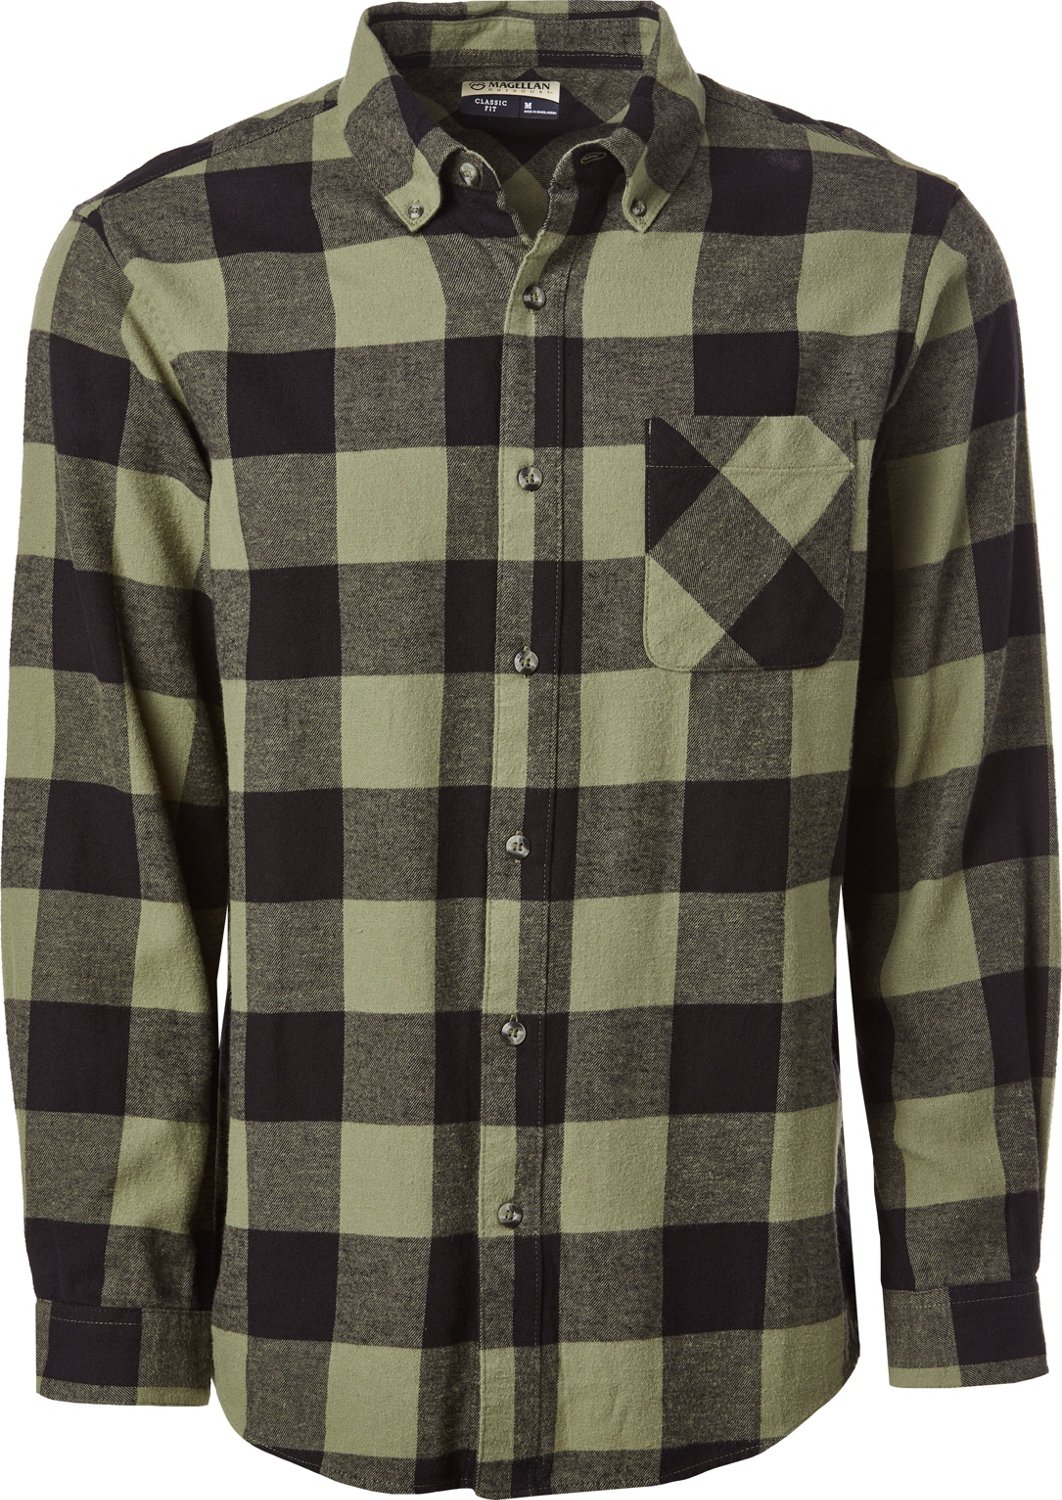 Tops, Astros Colored Flannel Shirt